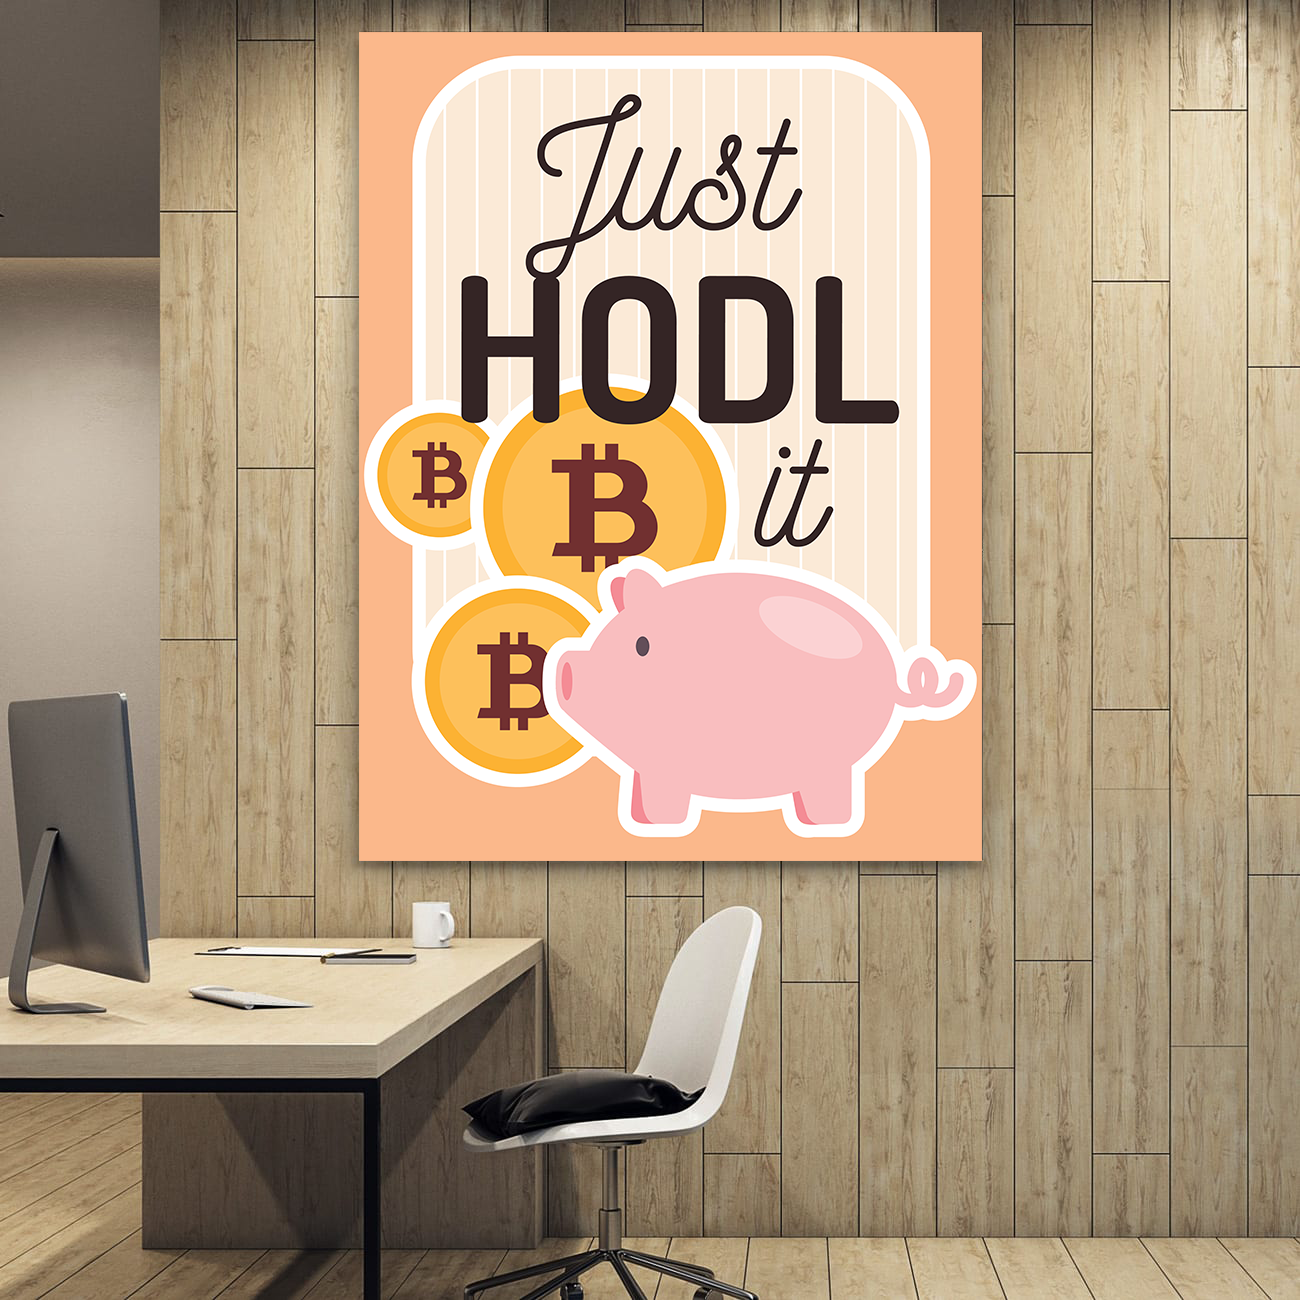 Just HODL on to It - Stock Buddies -Canvas Wraps